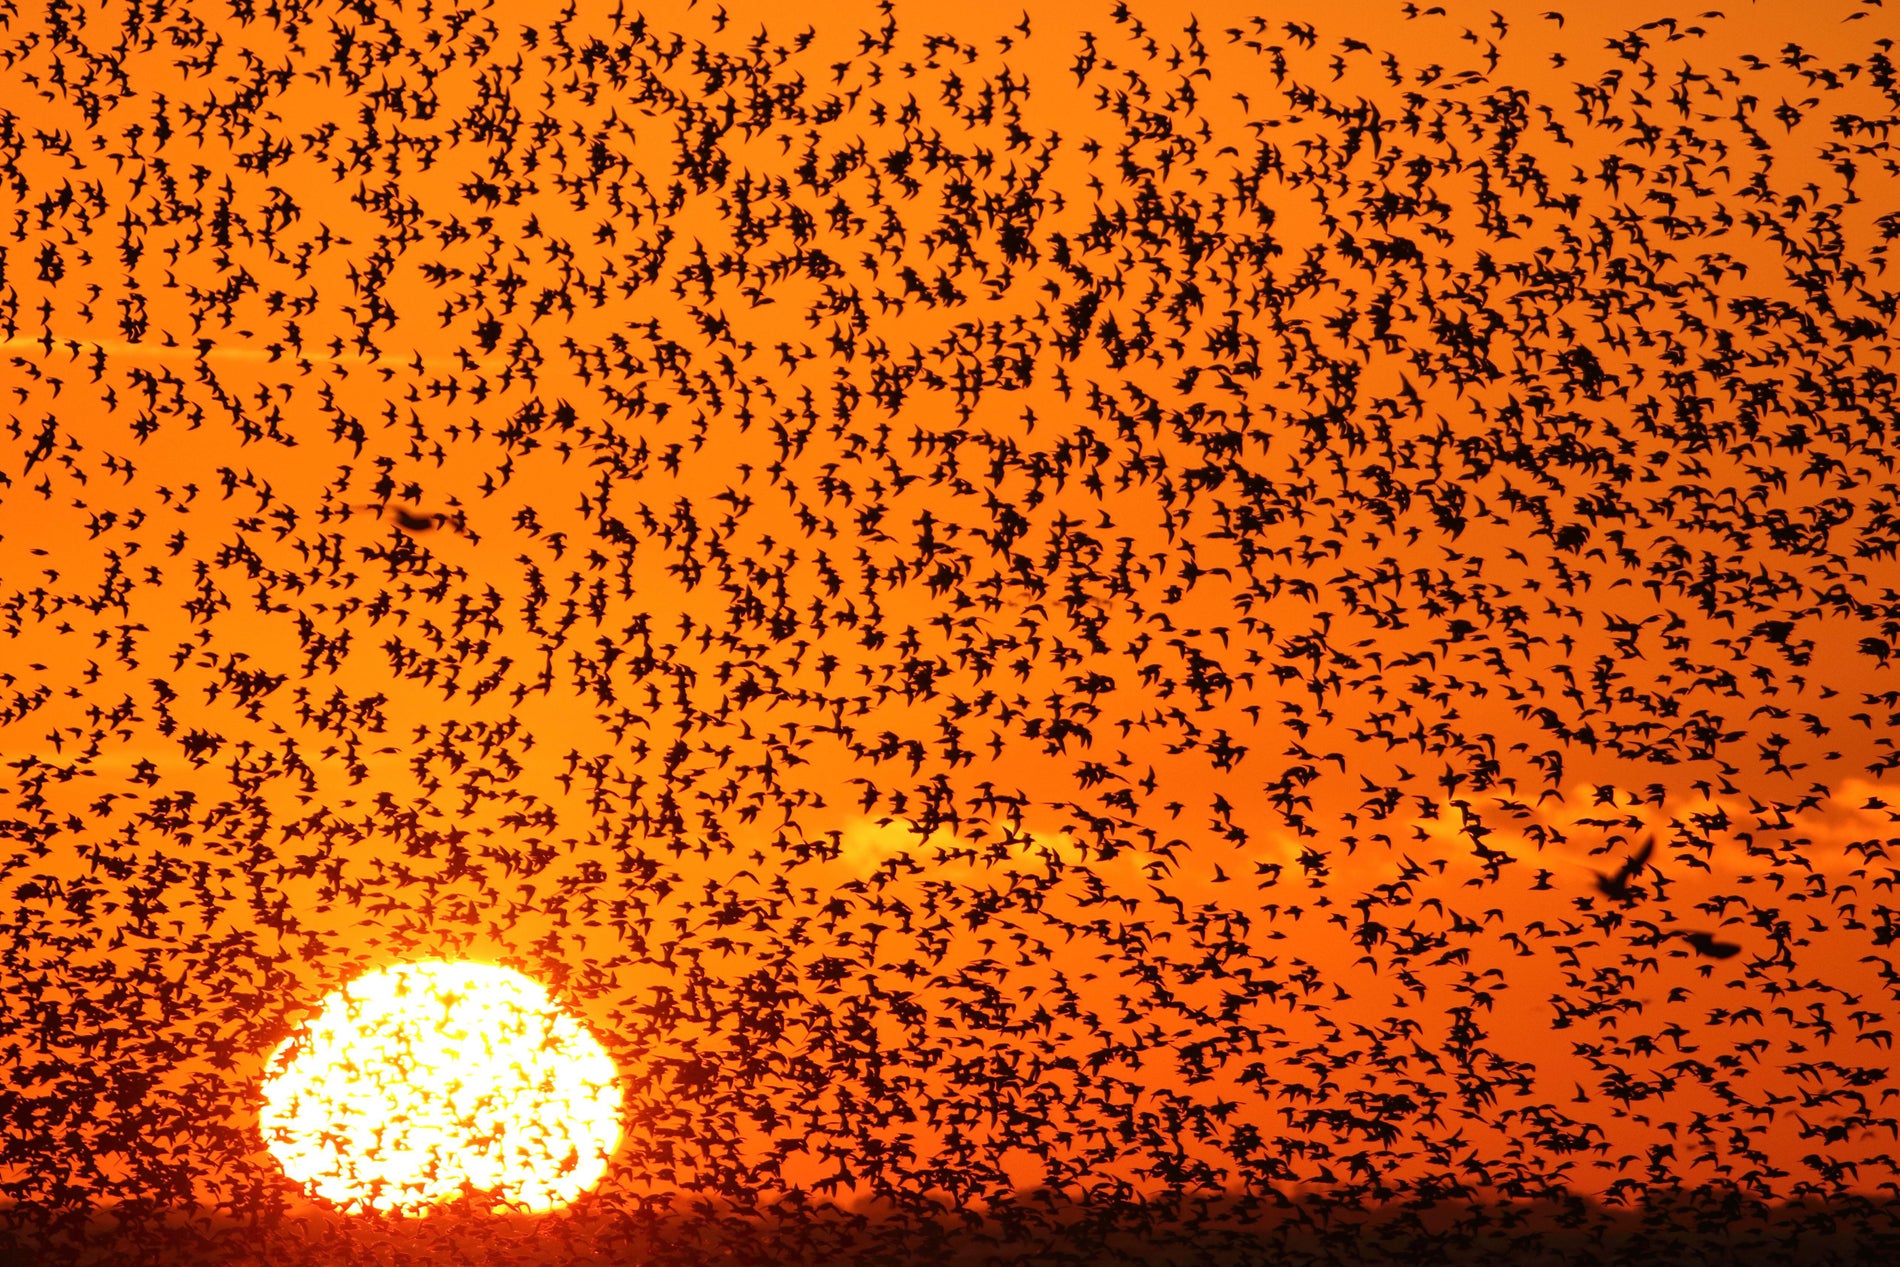 Red Knot flock of thousands at sunset in Snettisham (Alamy/PA)